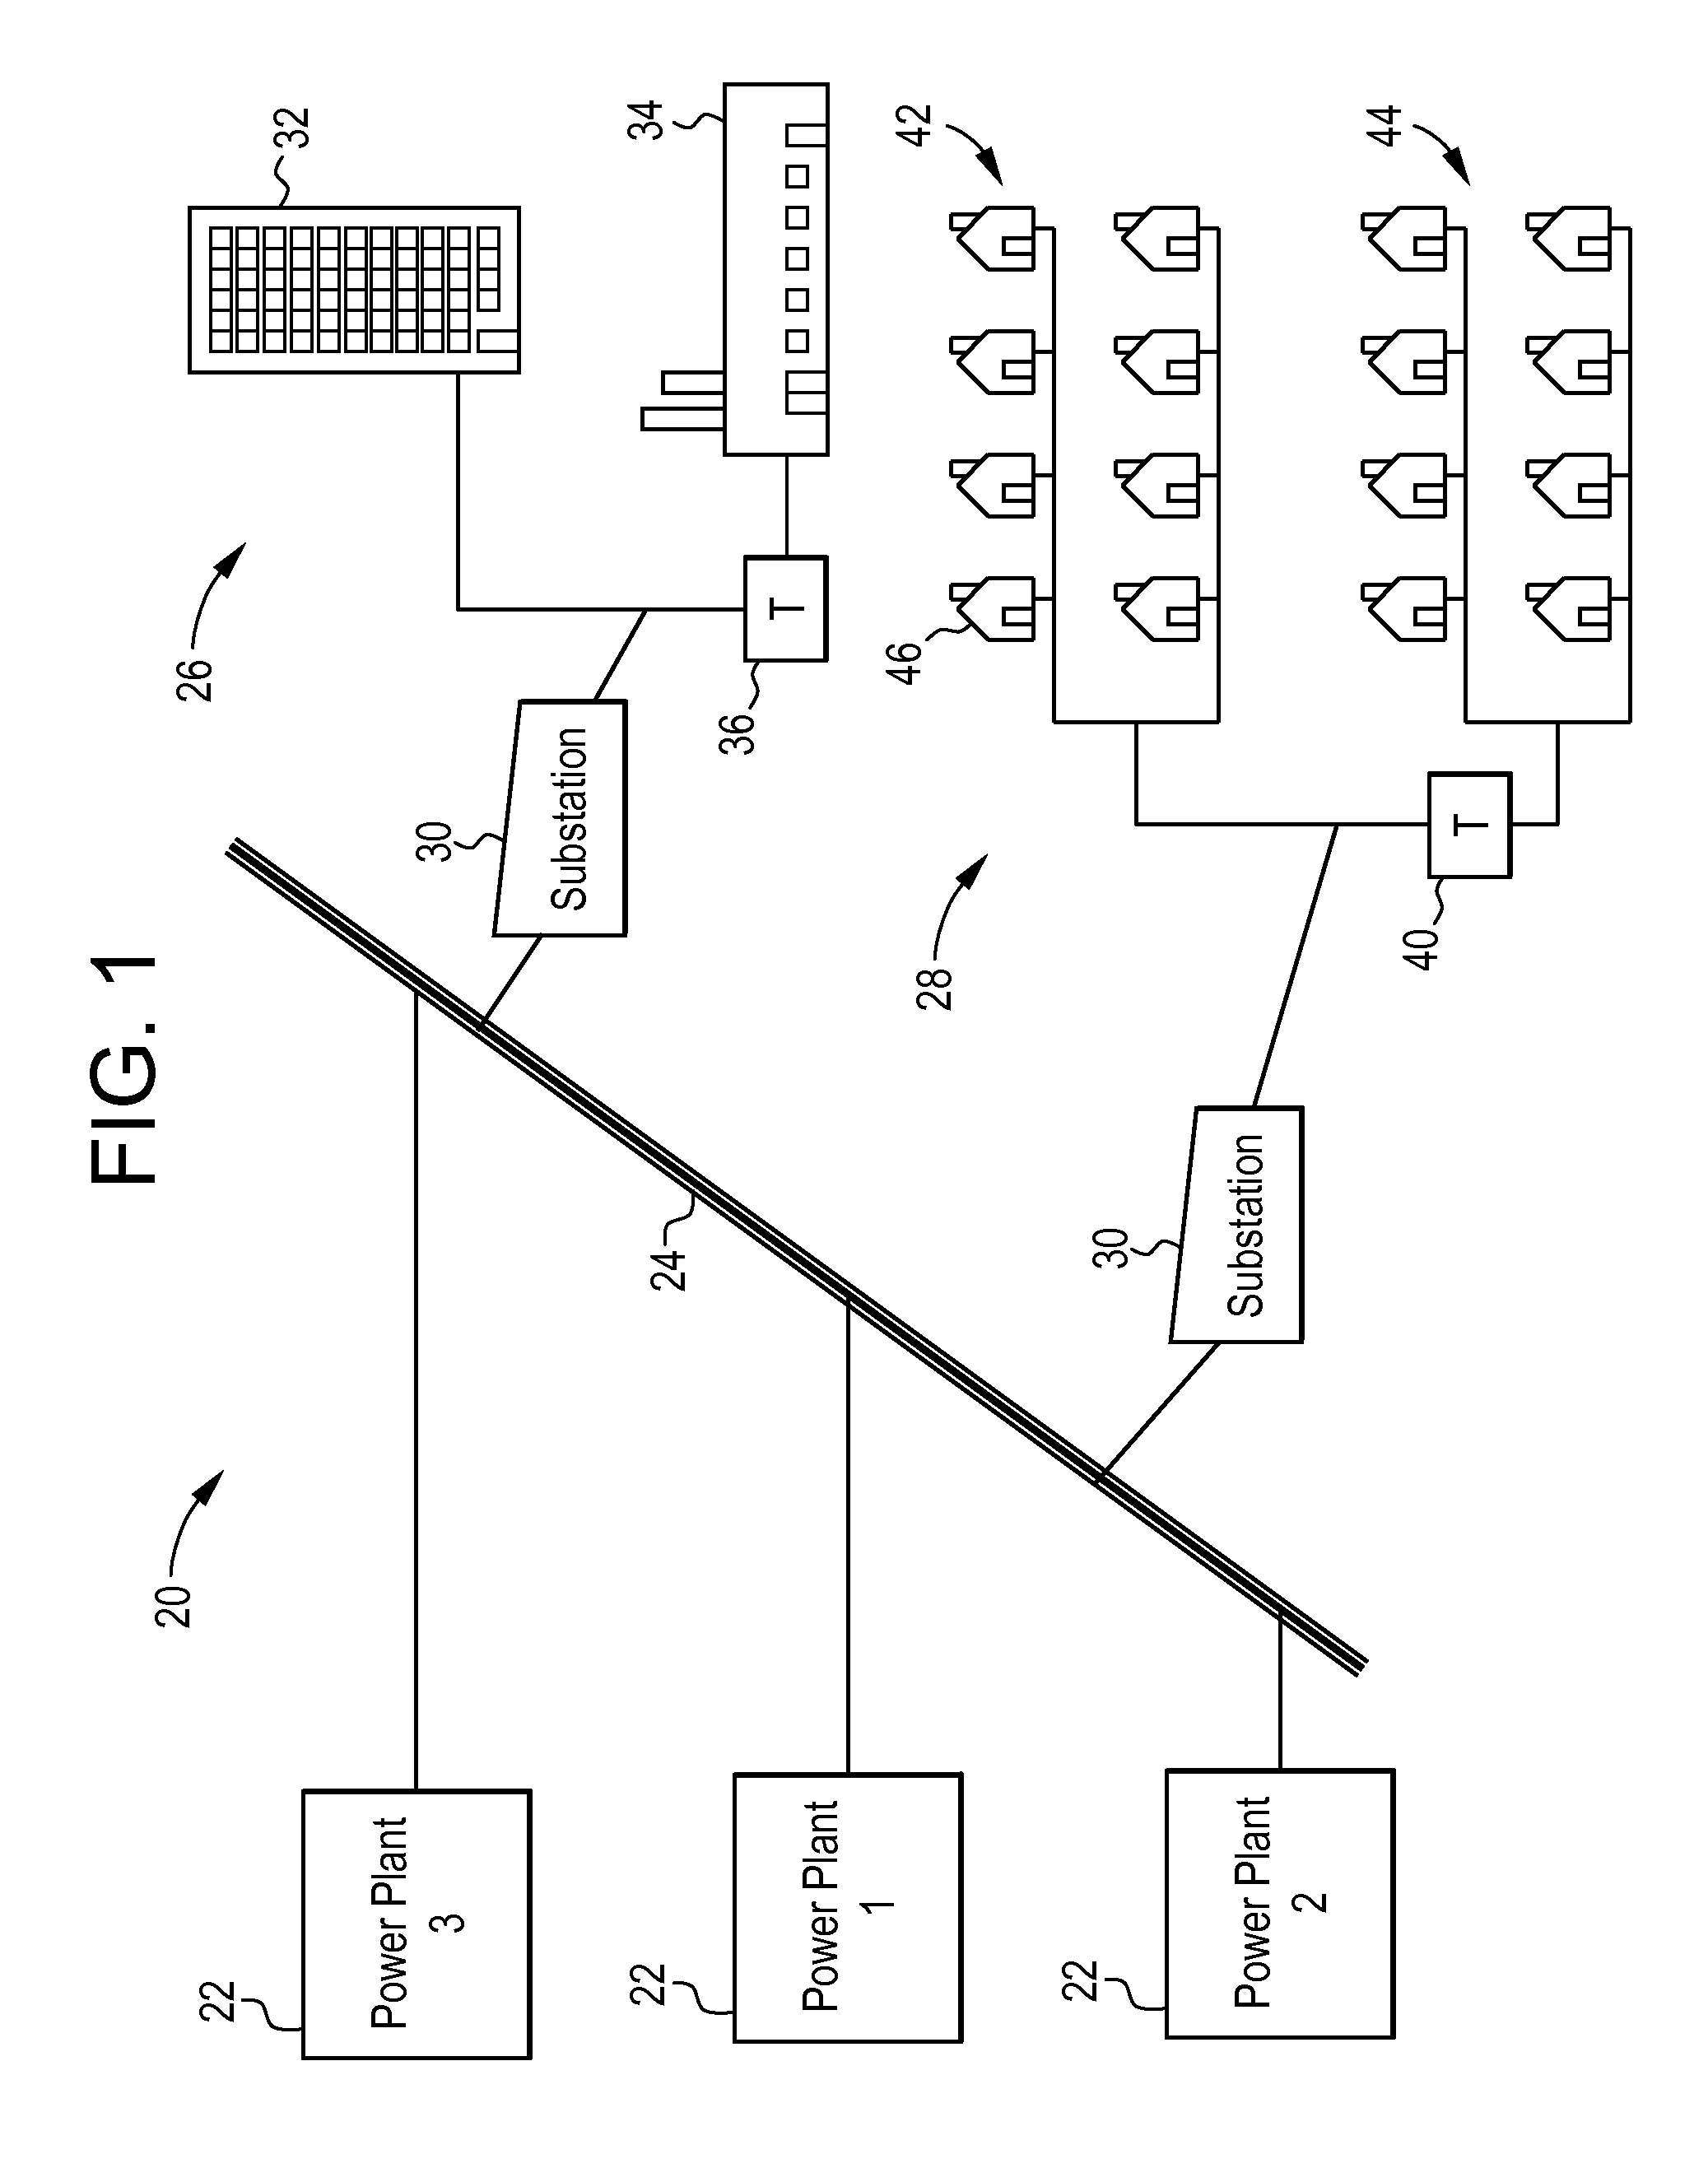 Hybrid vehicle recharging system and method of operation